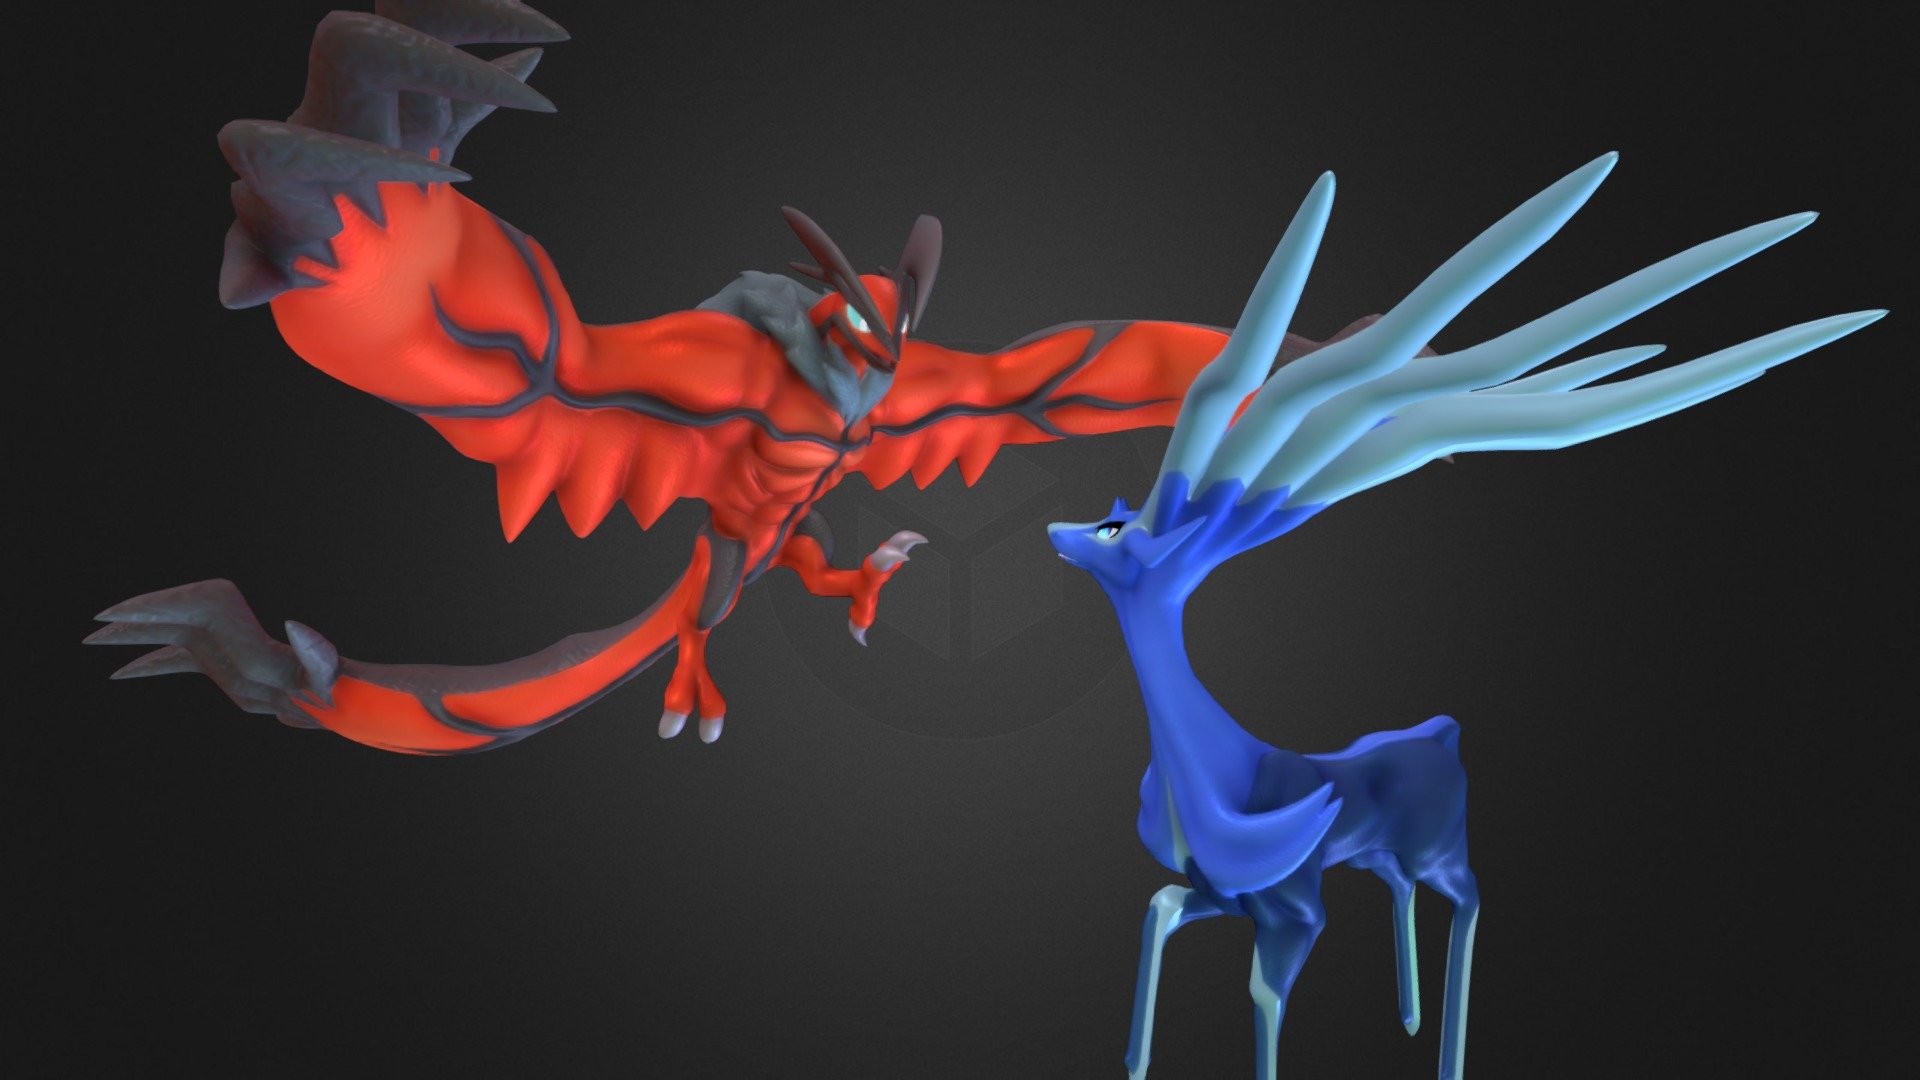 Stylized versions of these 2 Pokemon. I tried giving them more detail and deninition while keeping their origonal look 3d model